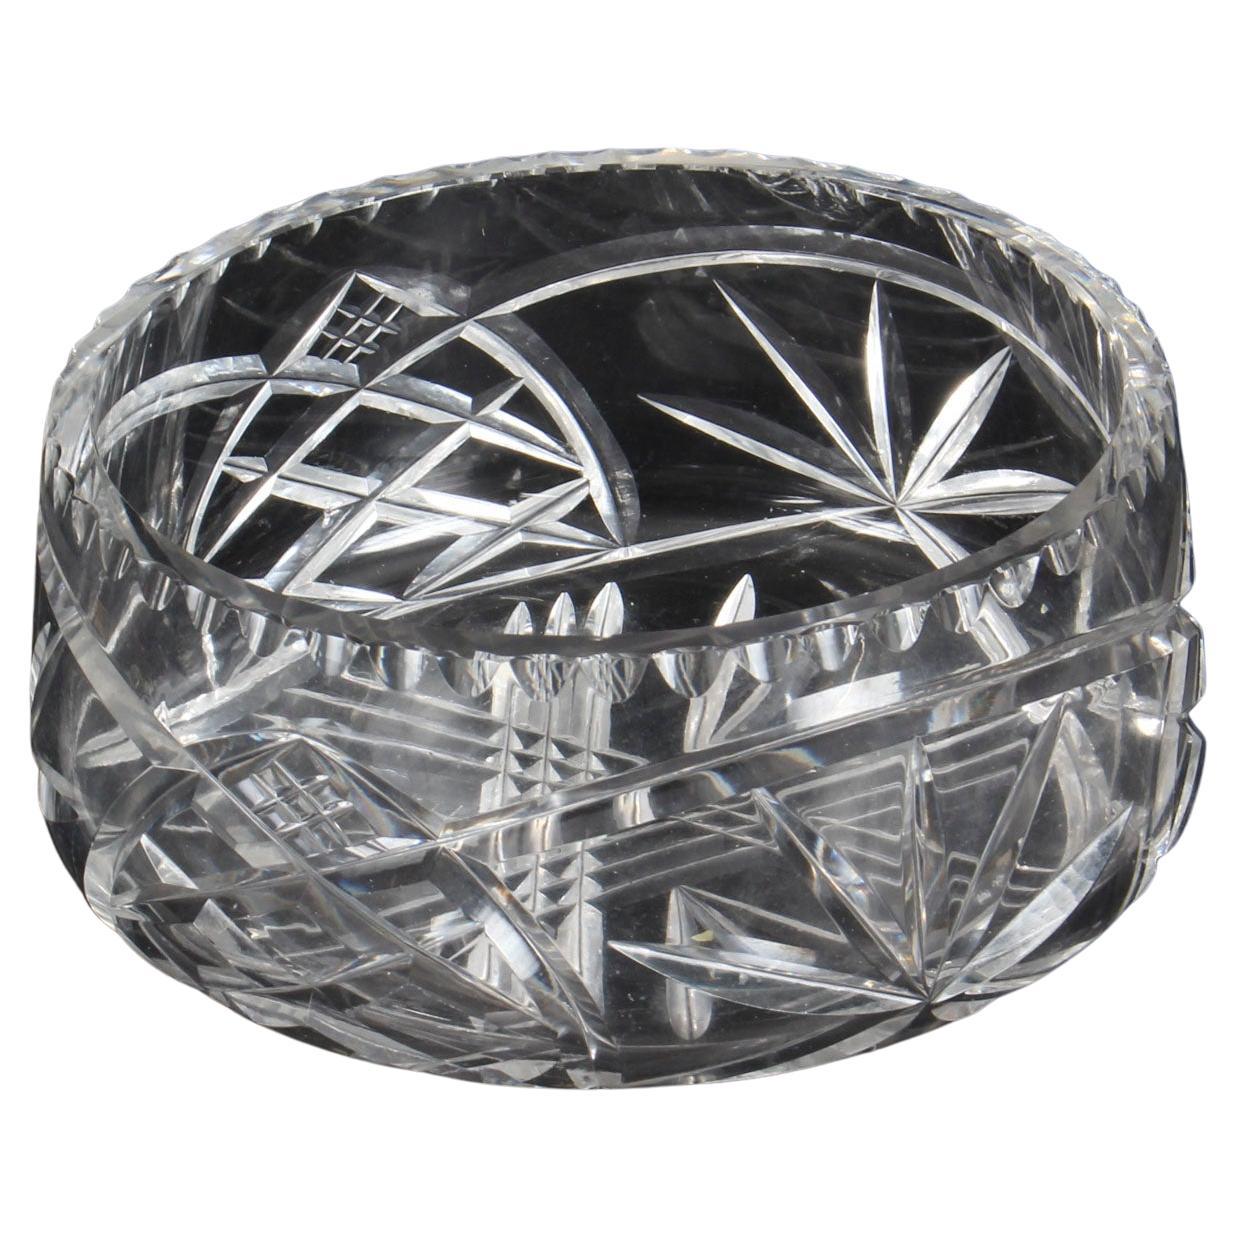 Vintage Cut Glass Crystal Bowl 20th Century For Sale